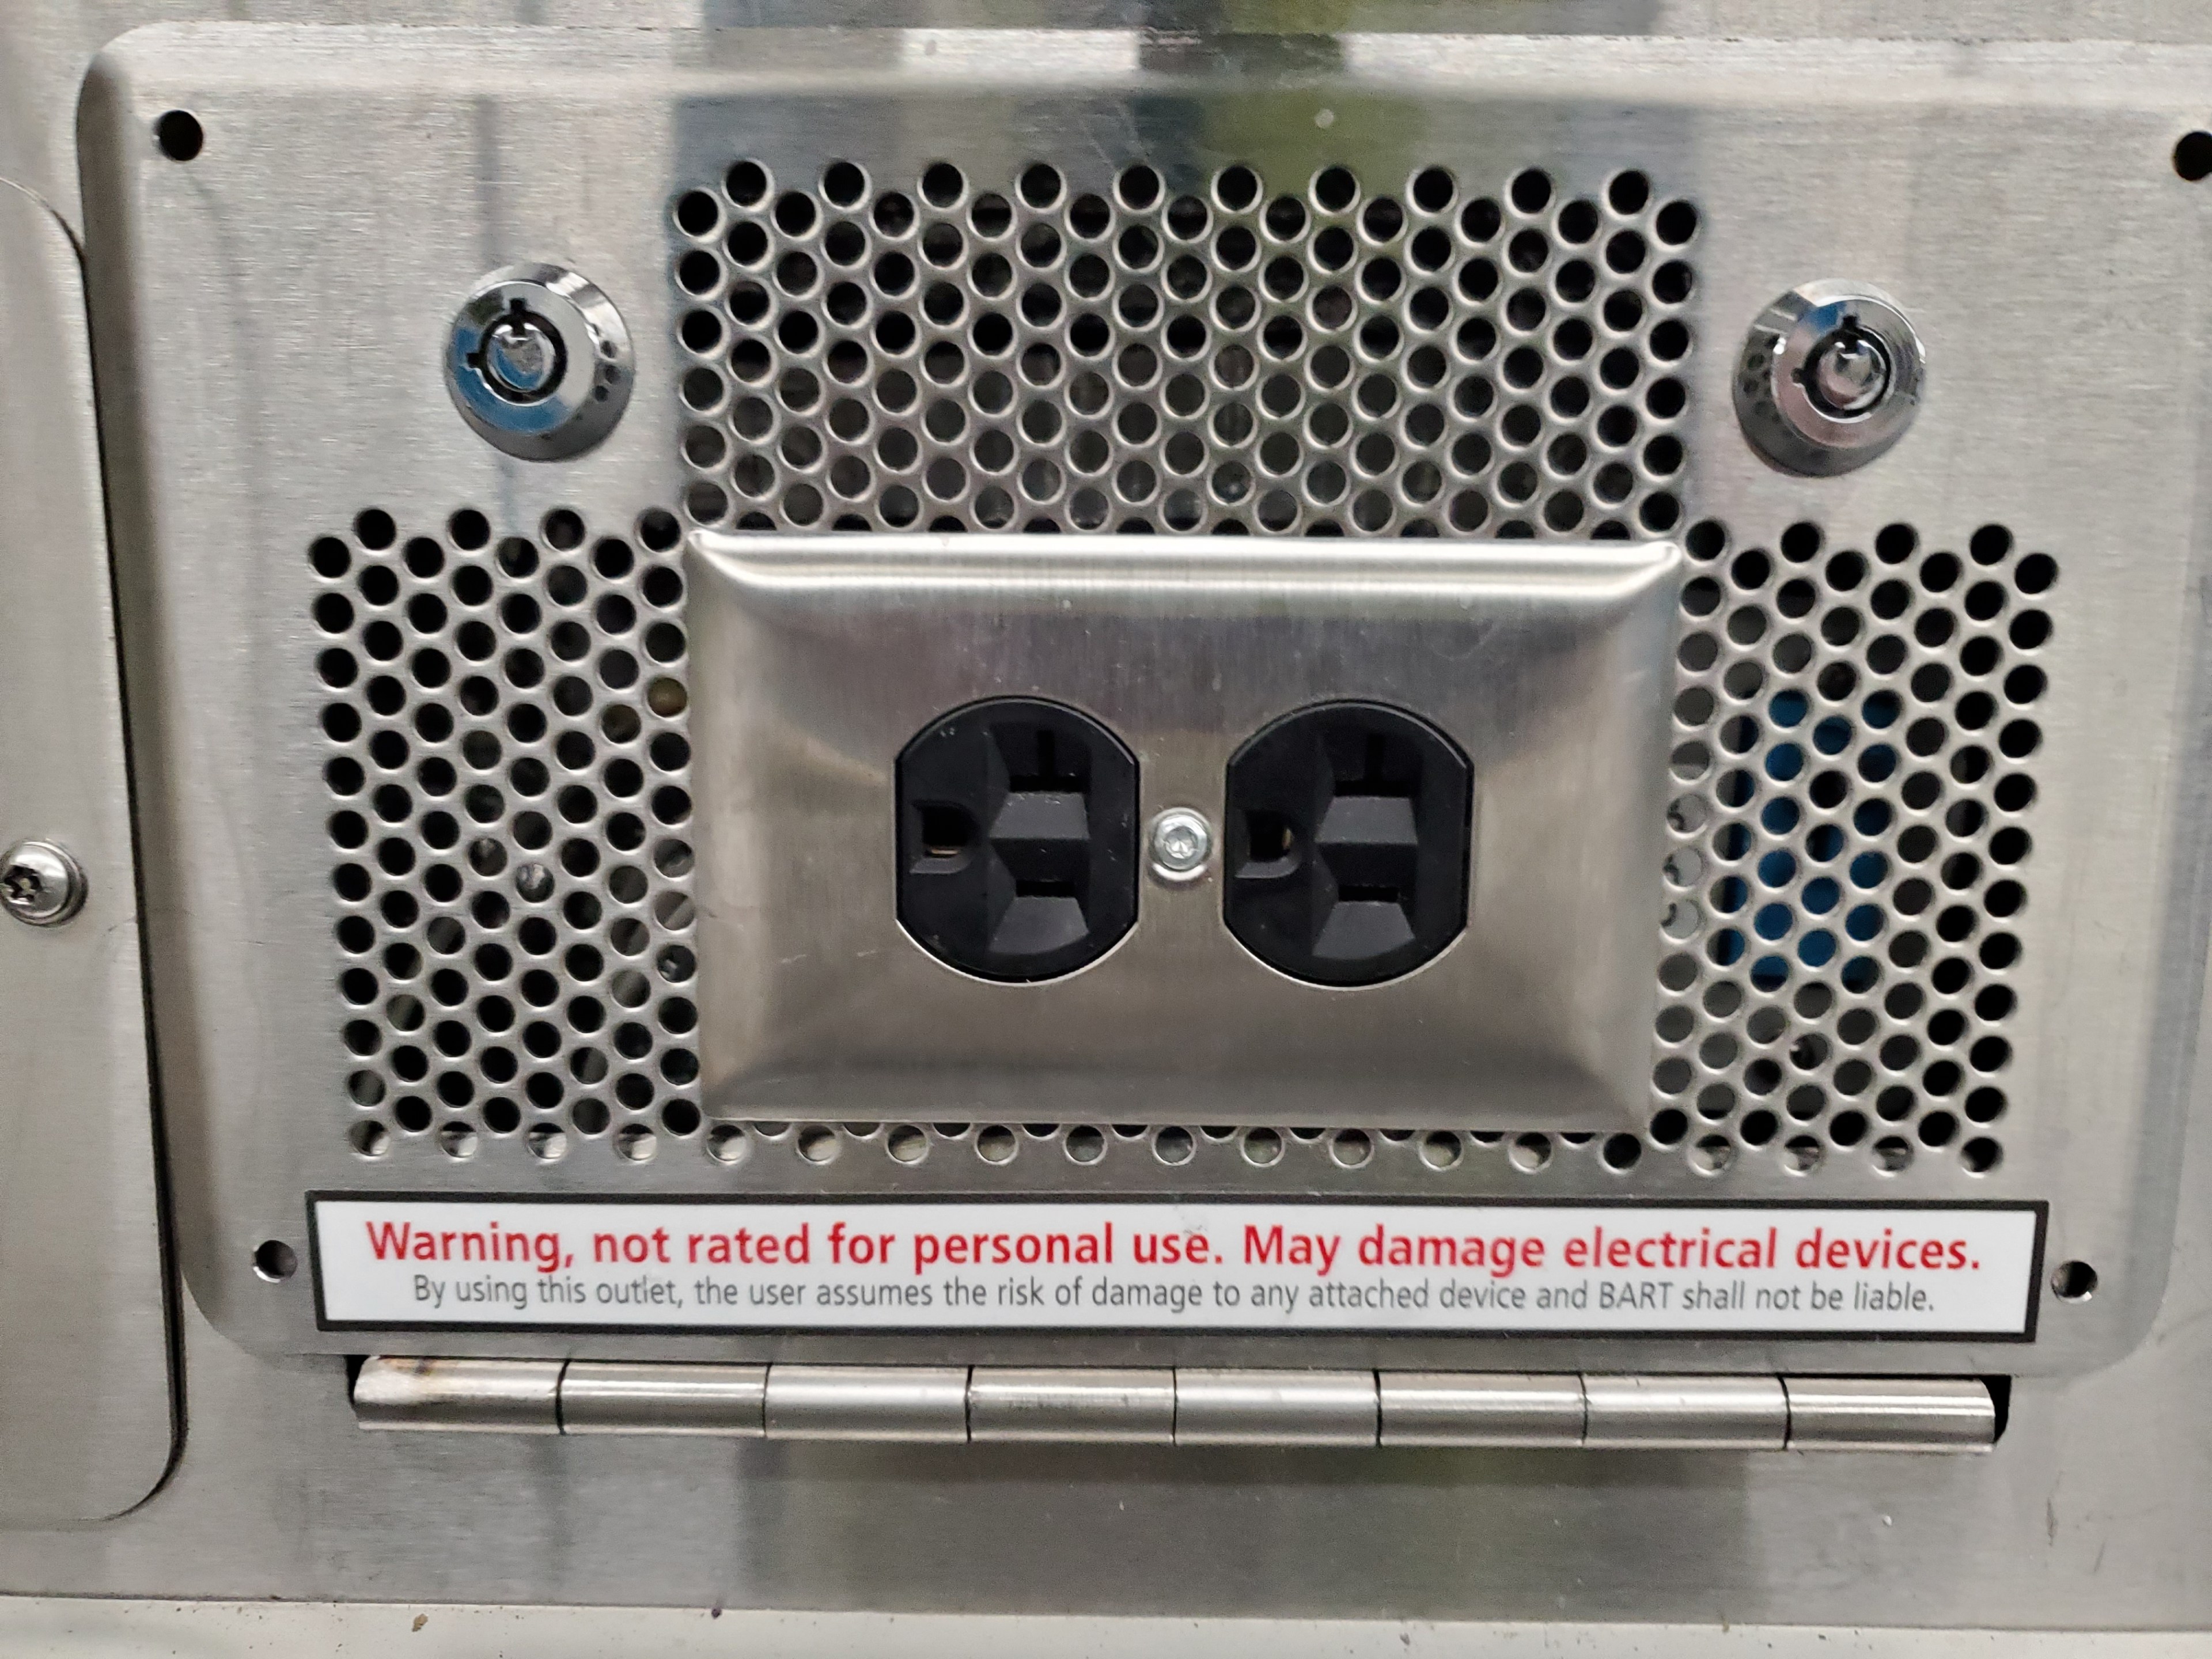 A sign on an electrical outlet warns users to tap into it at their own risk.